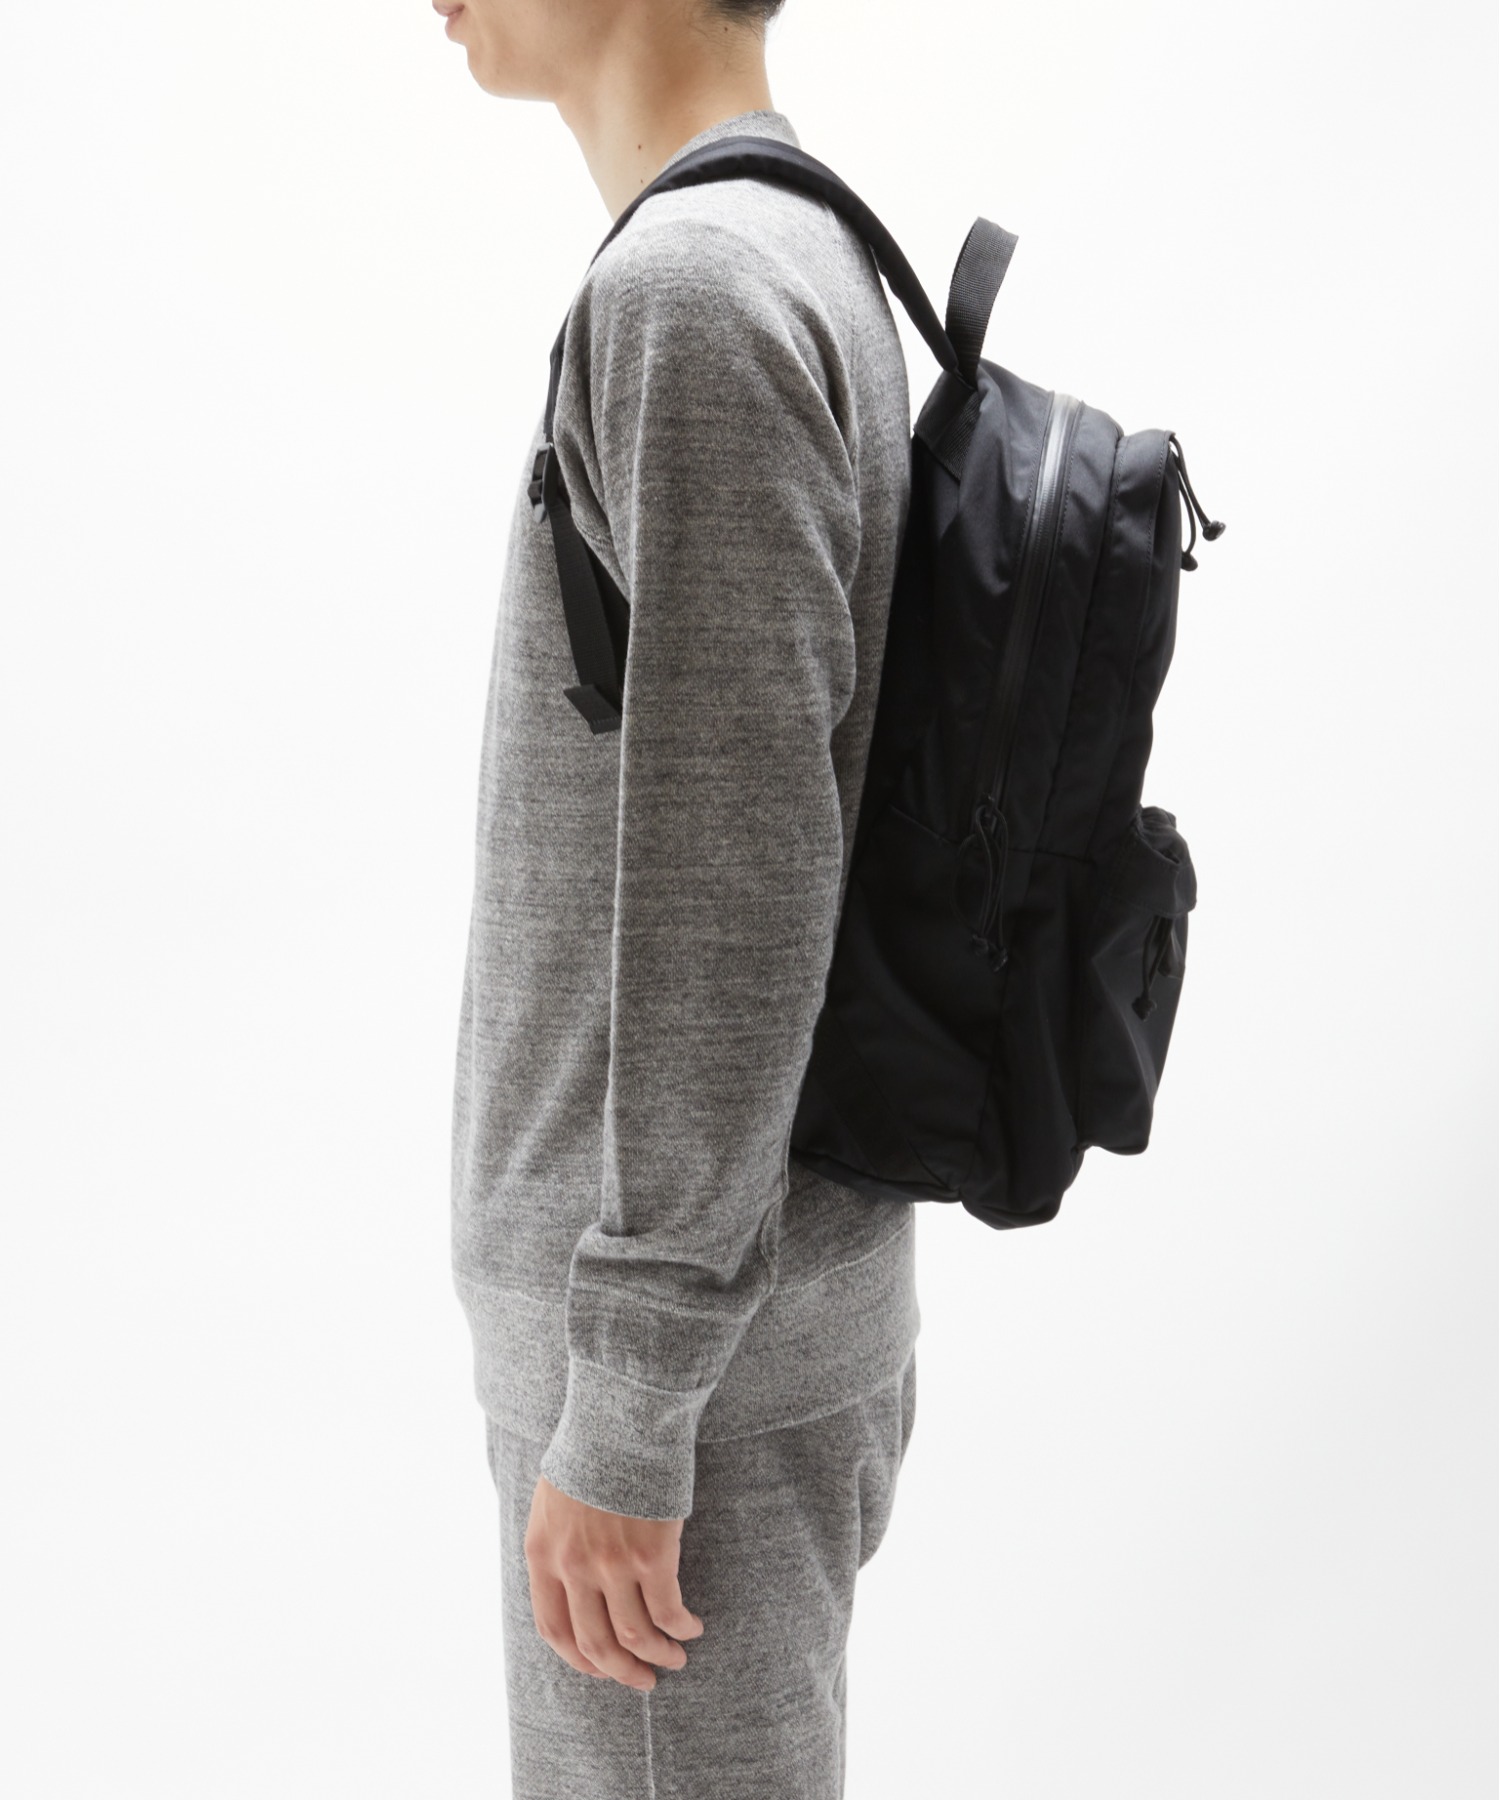 BACK PACK (SMALL)